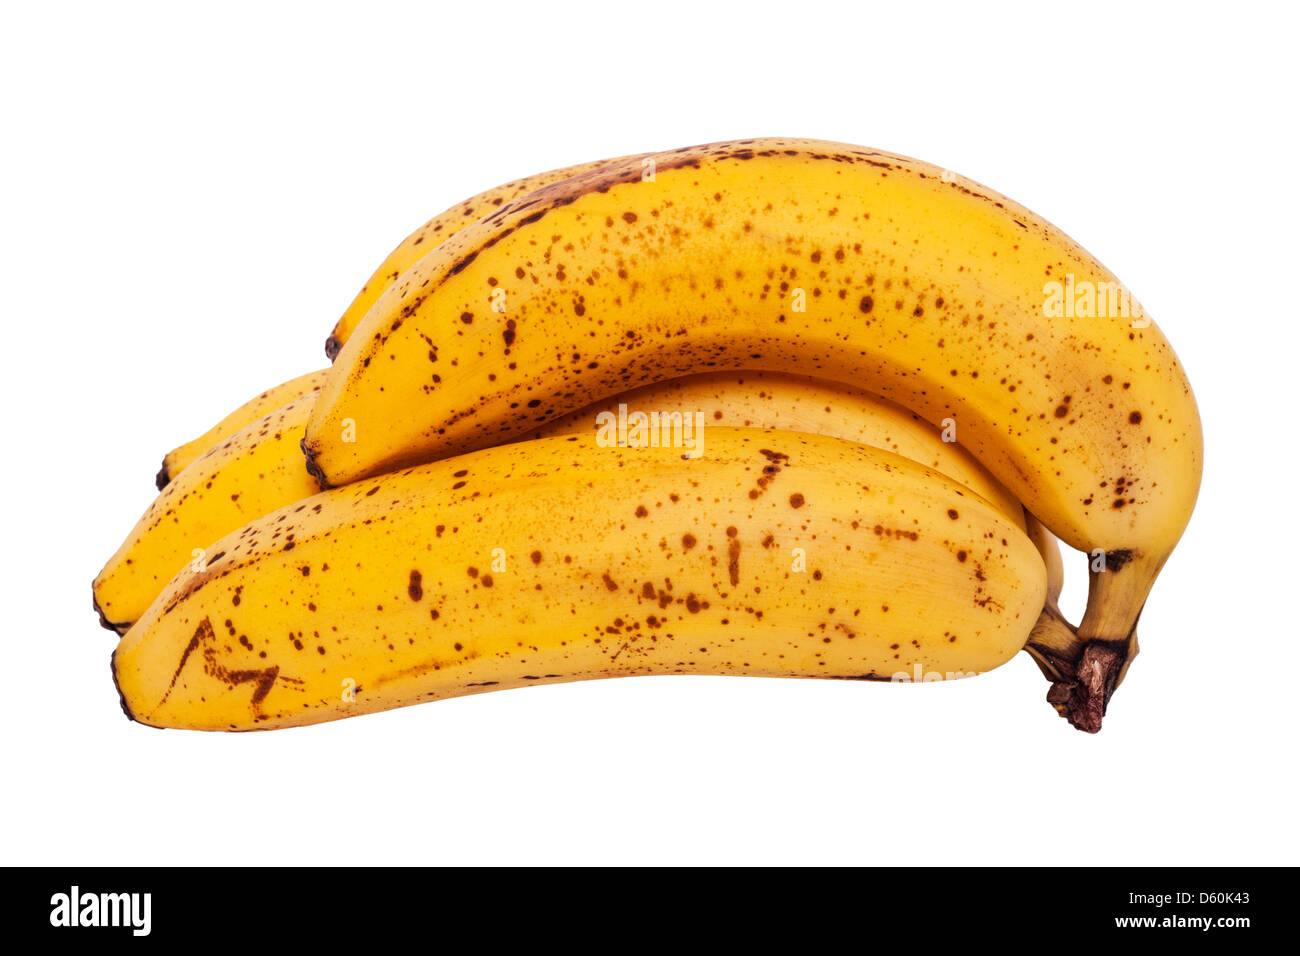 A bunch of over ripe bananas on a white background Stock Photo